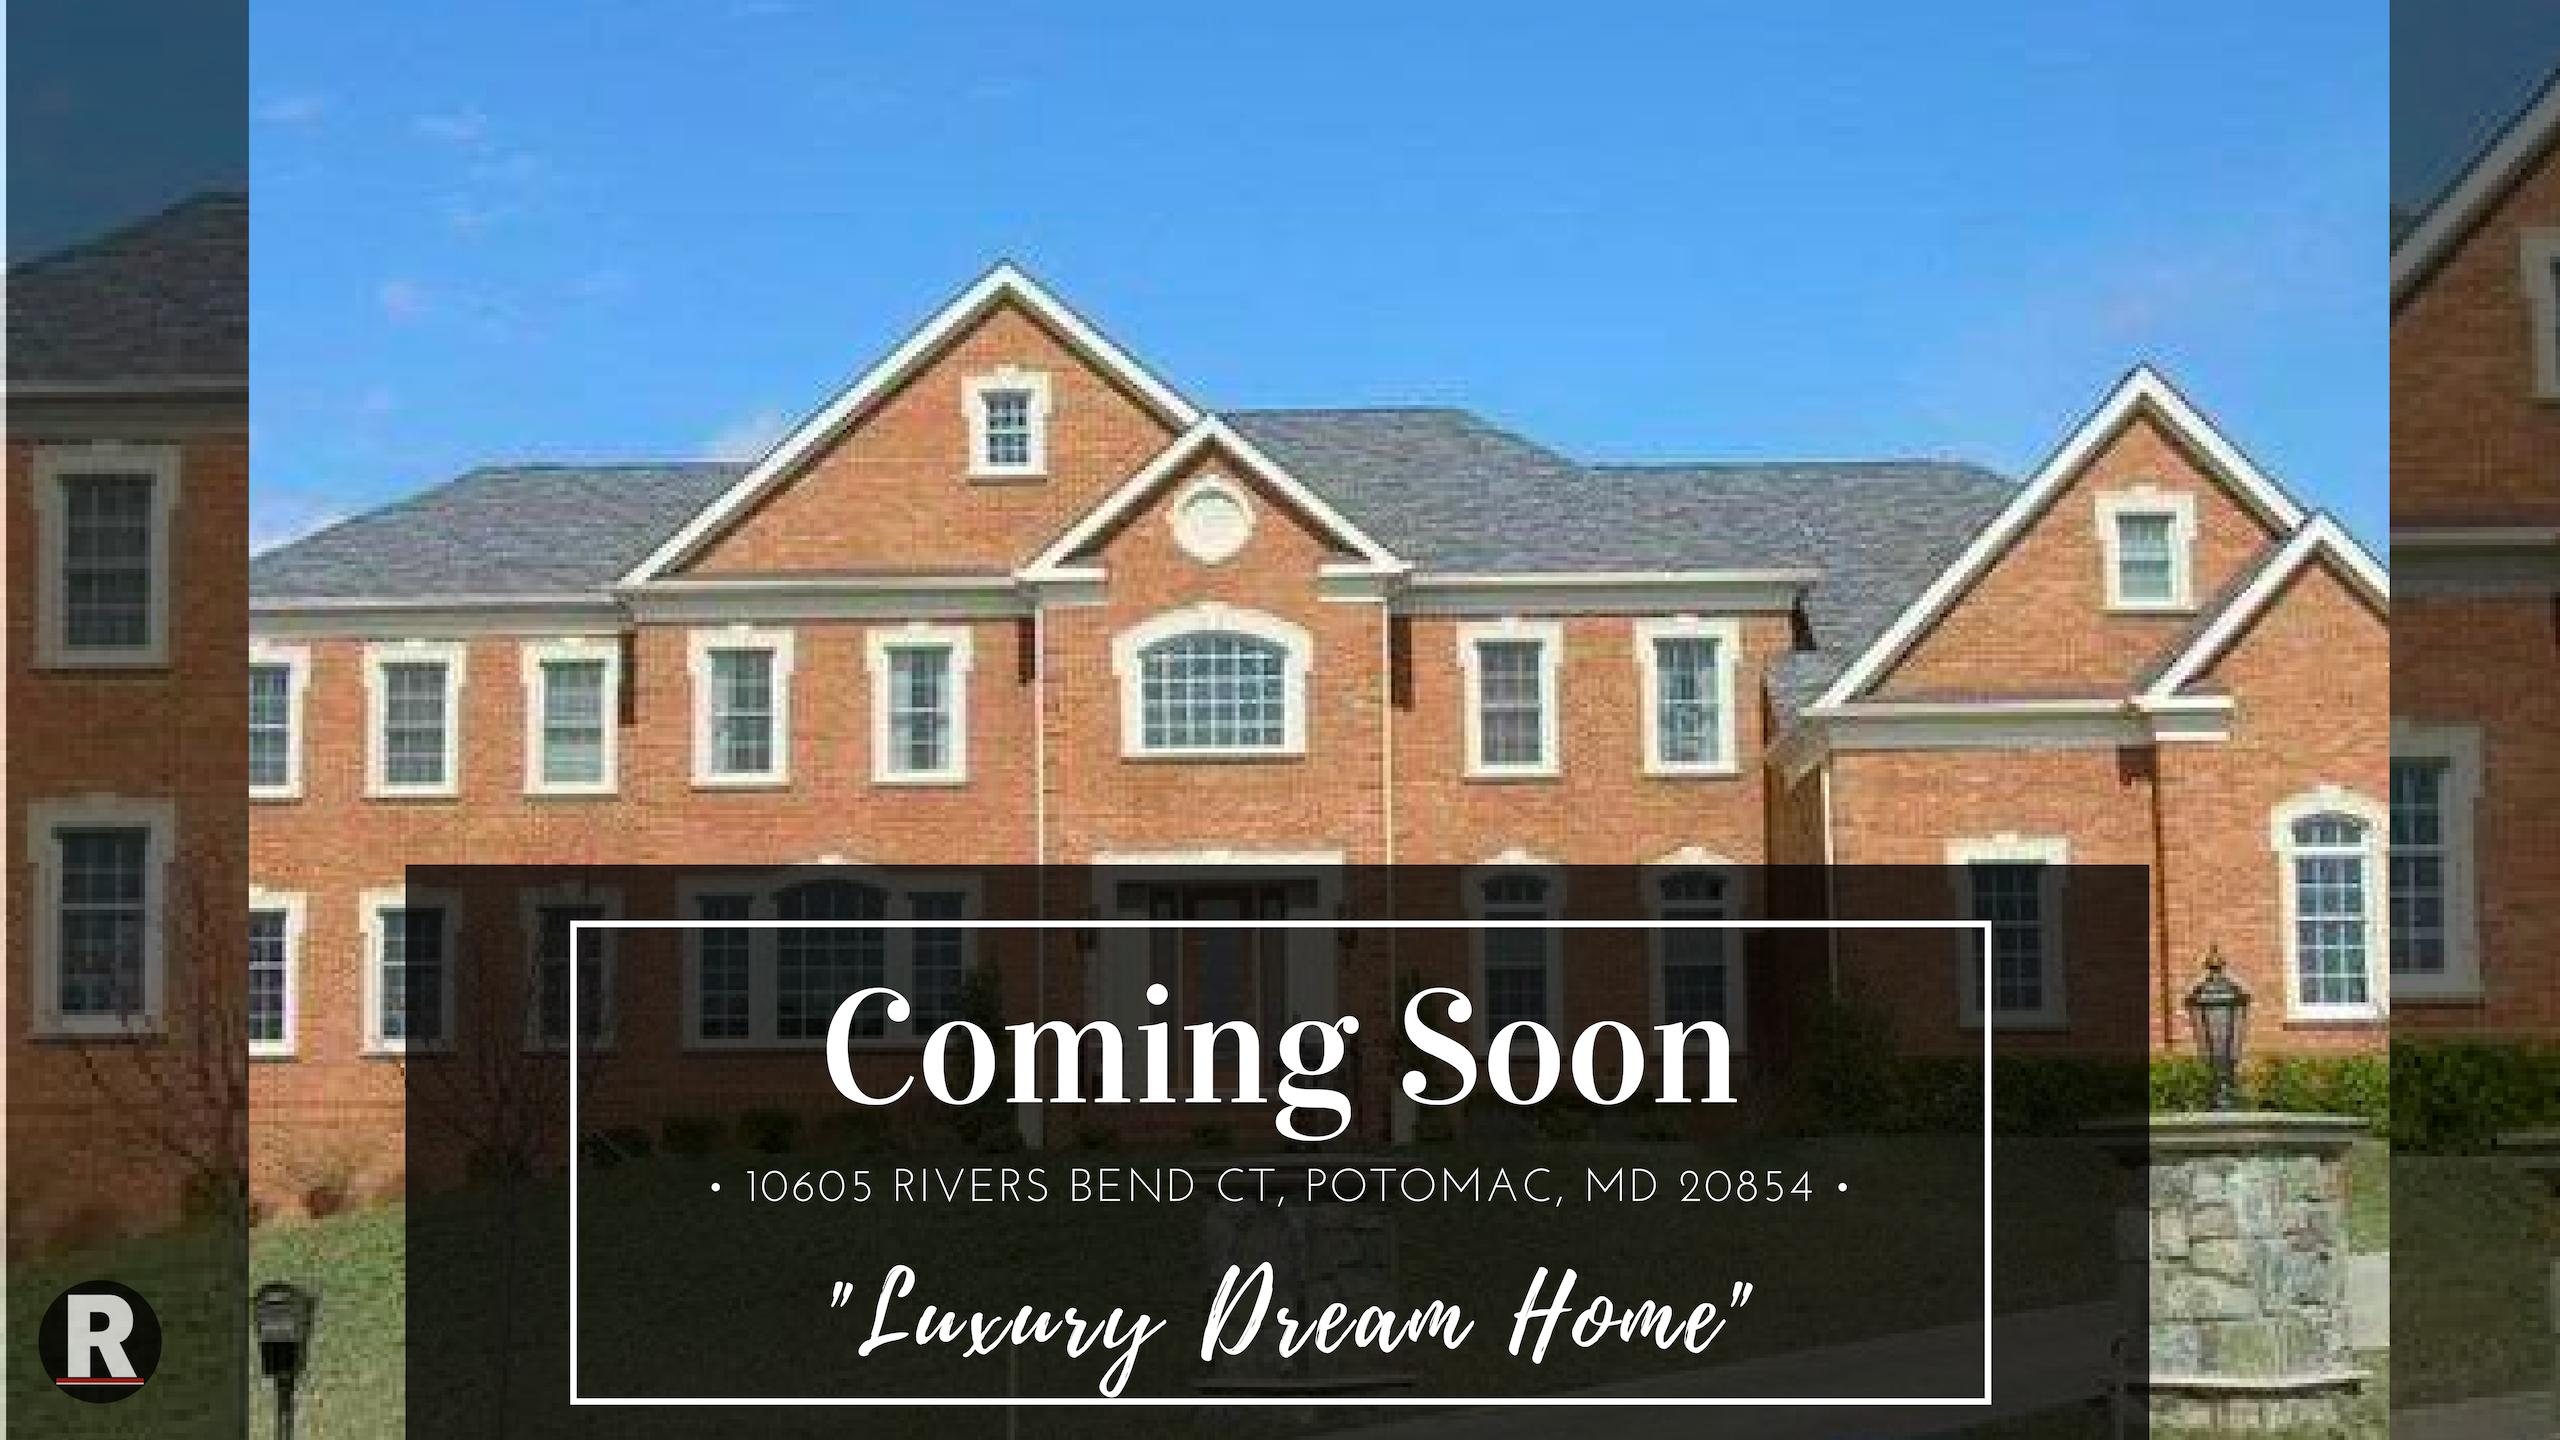 Coming Soon! 10605 Rivers Bend Ct, Potomac, MD 20854